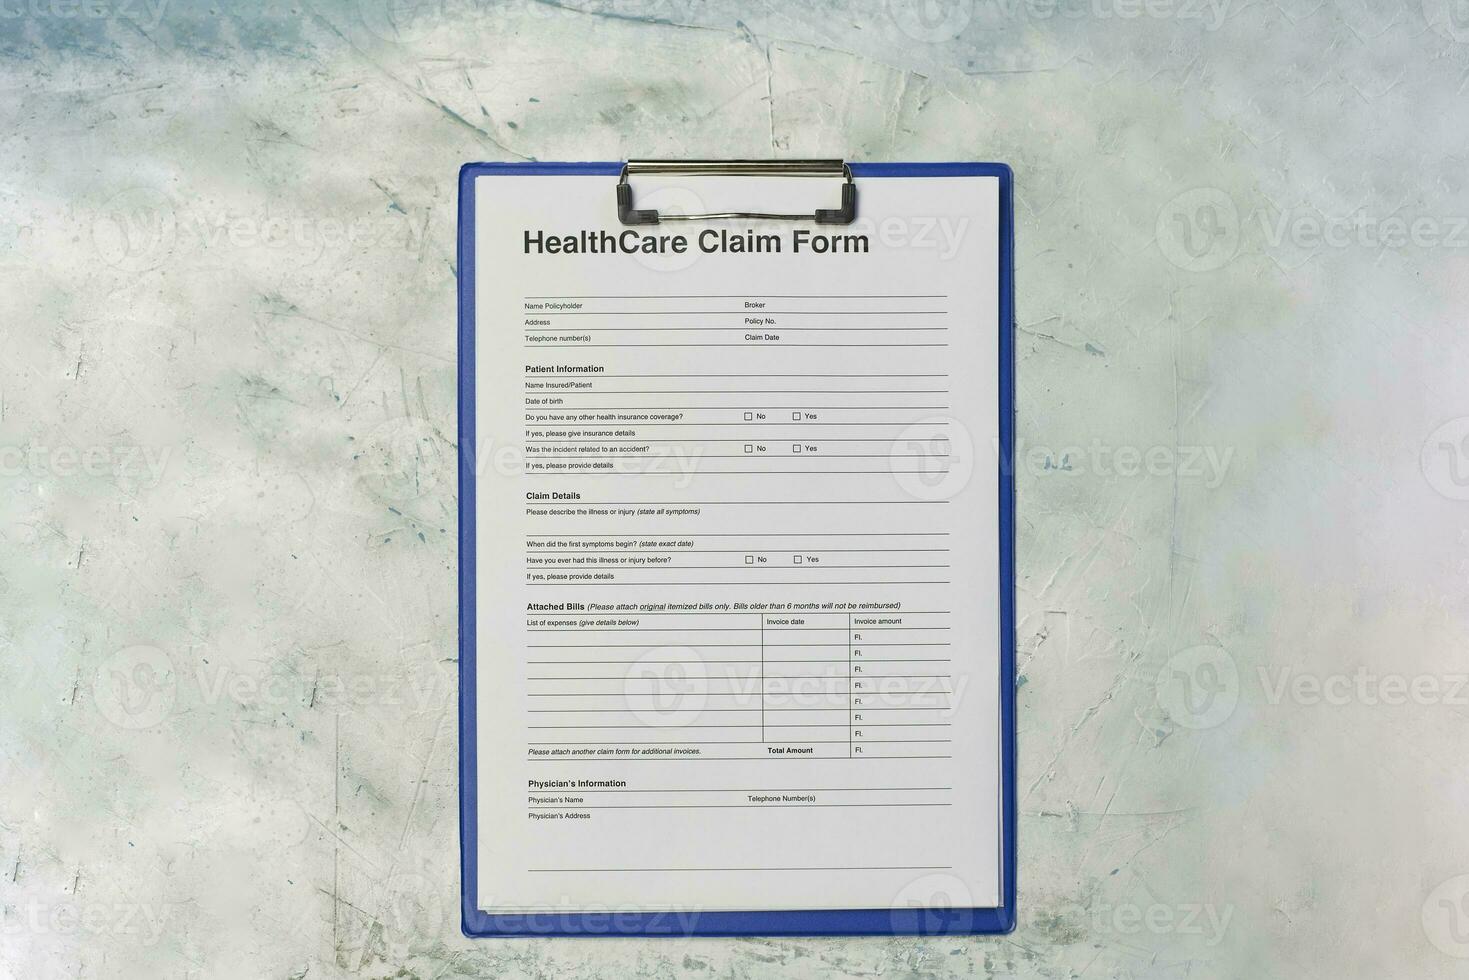 Health care cost or Health Insurance application form photo